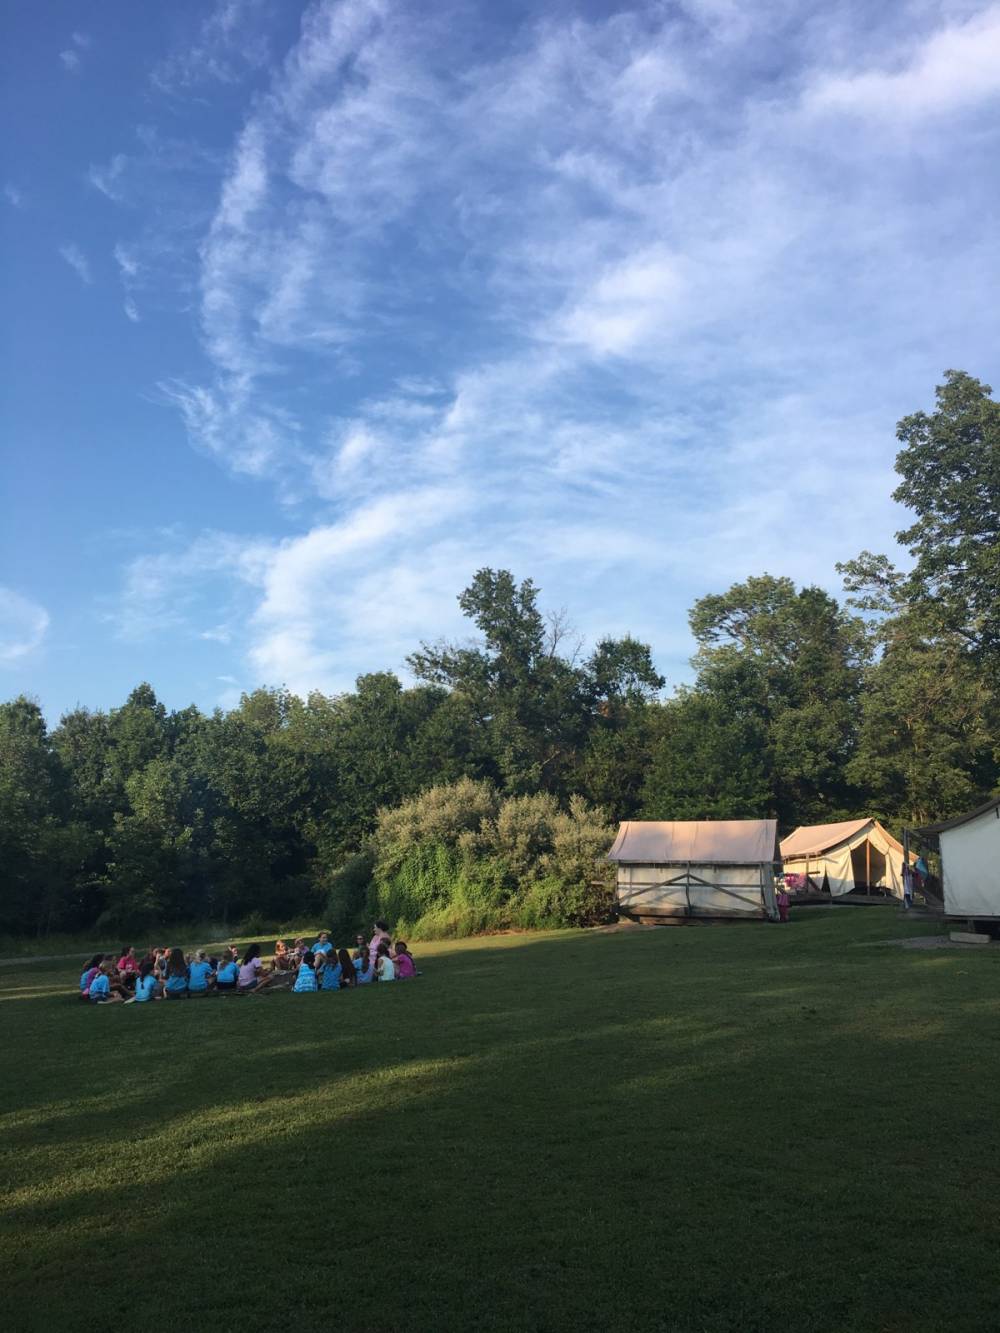 TOP NEW JERSEY TRAVEL CAMP: Camp Agnes DeWitt is a Top Travel Summer Camp located in Hillsborough New Jersey offering many fun and enriching Travel and other camp programs. Camp Agnes DeWitt also offers CIT/LIT and/or Teen Leadership Opportunities, too.